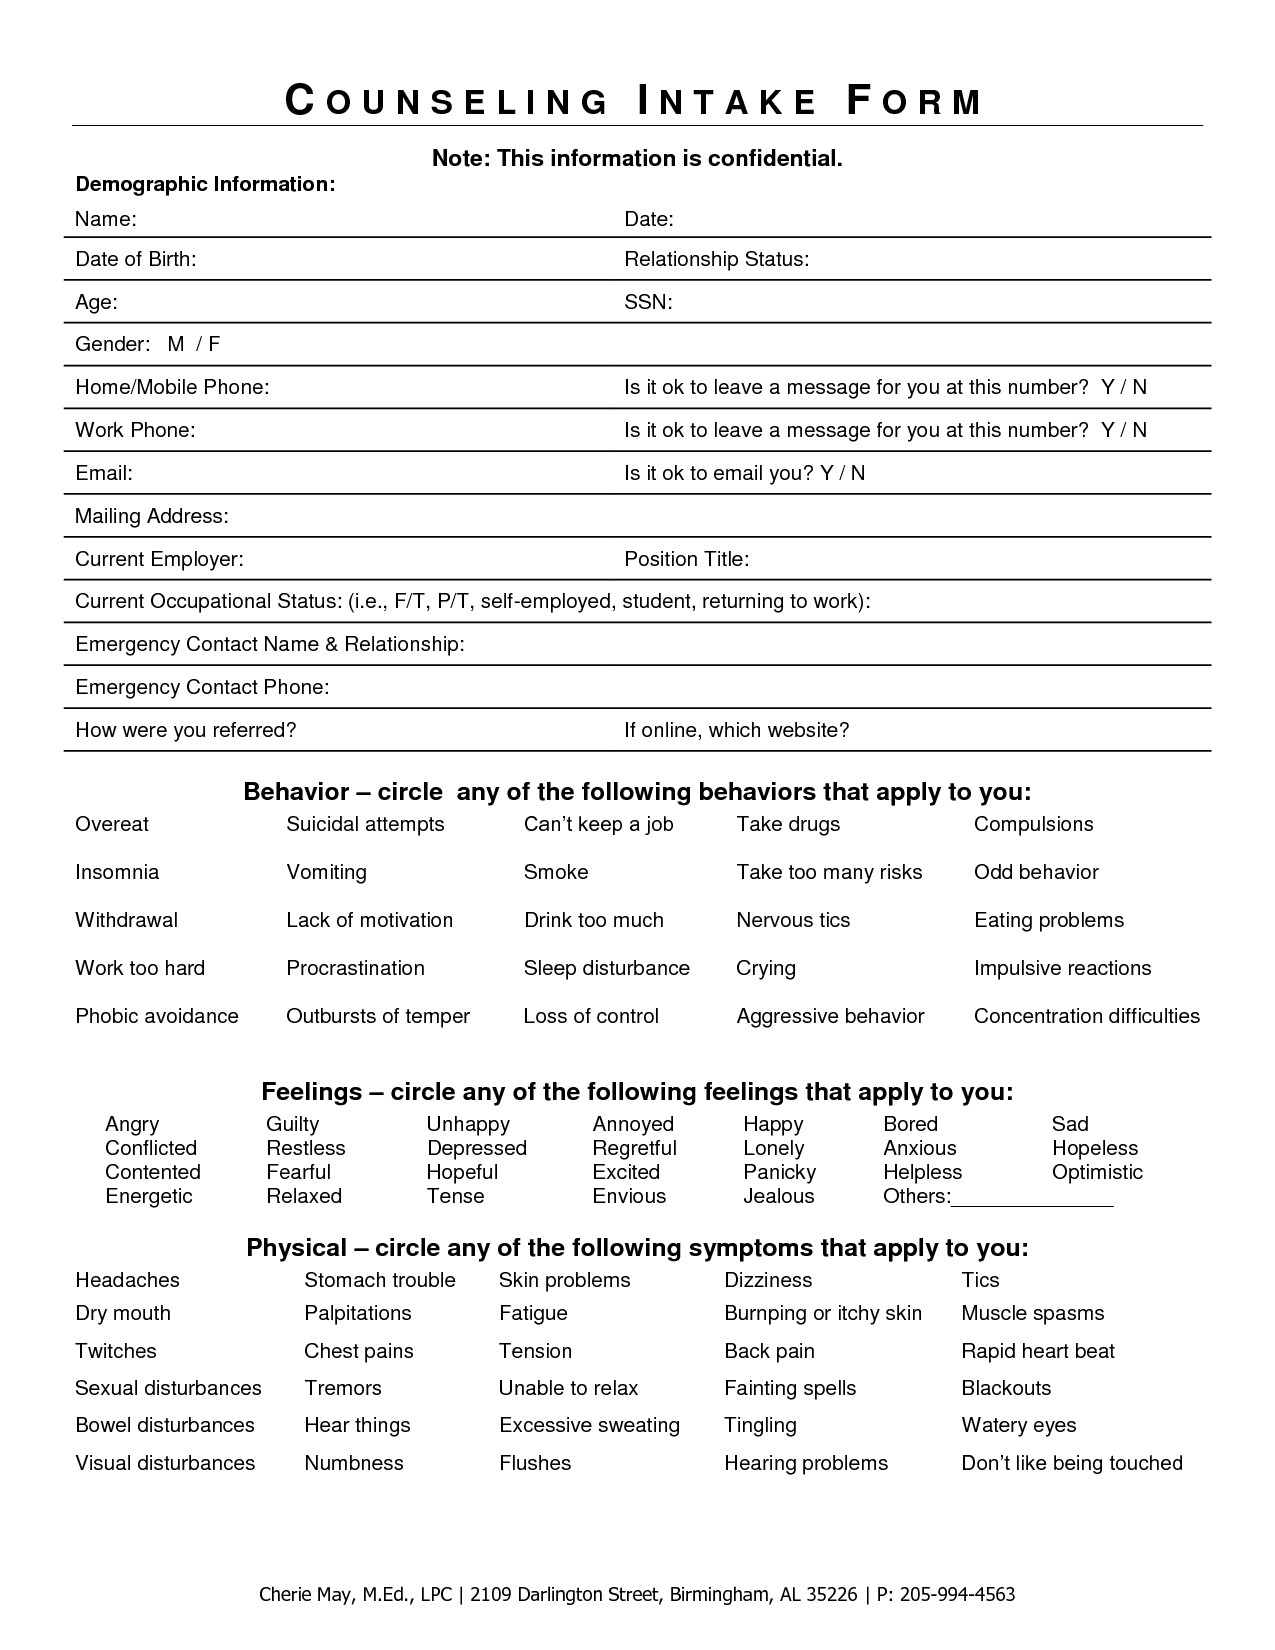 Client Intake form Template Intake form for Counseling Clients Google Search